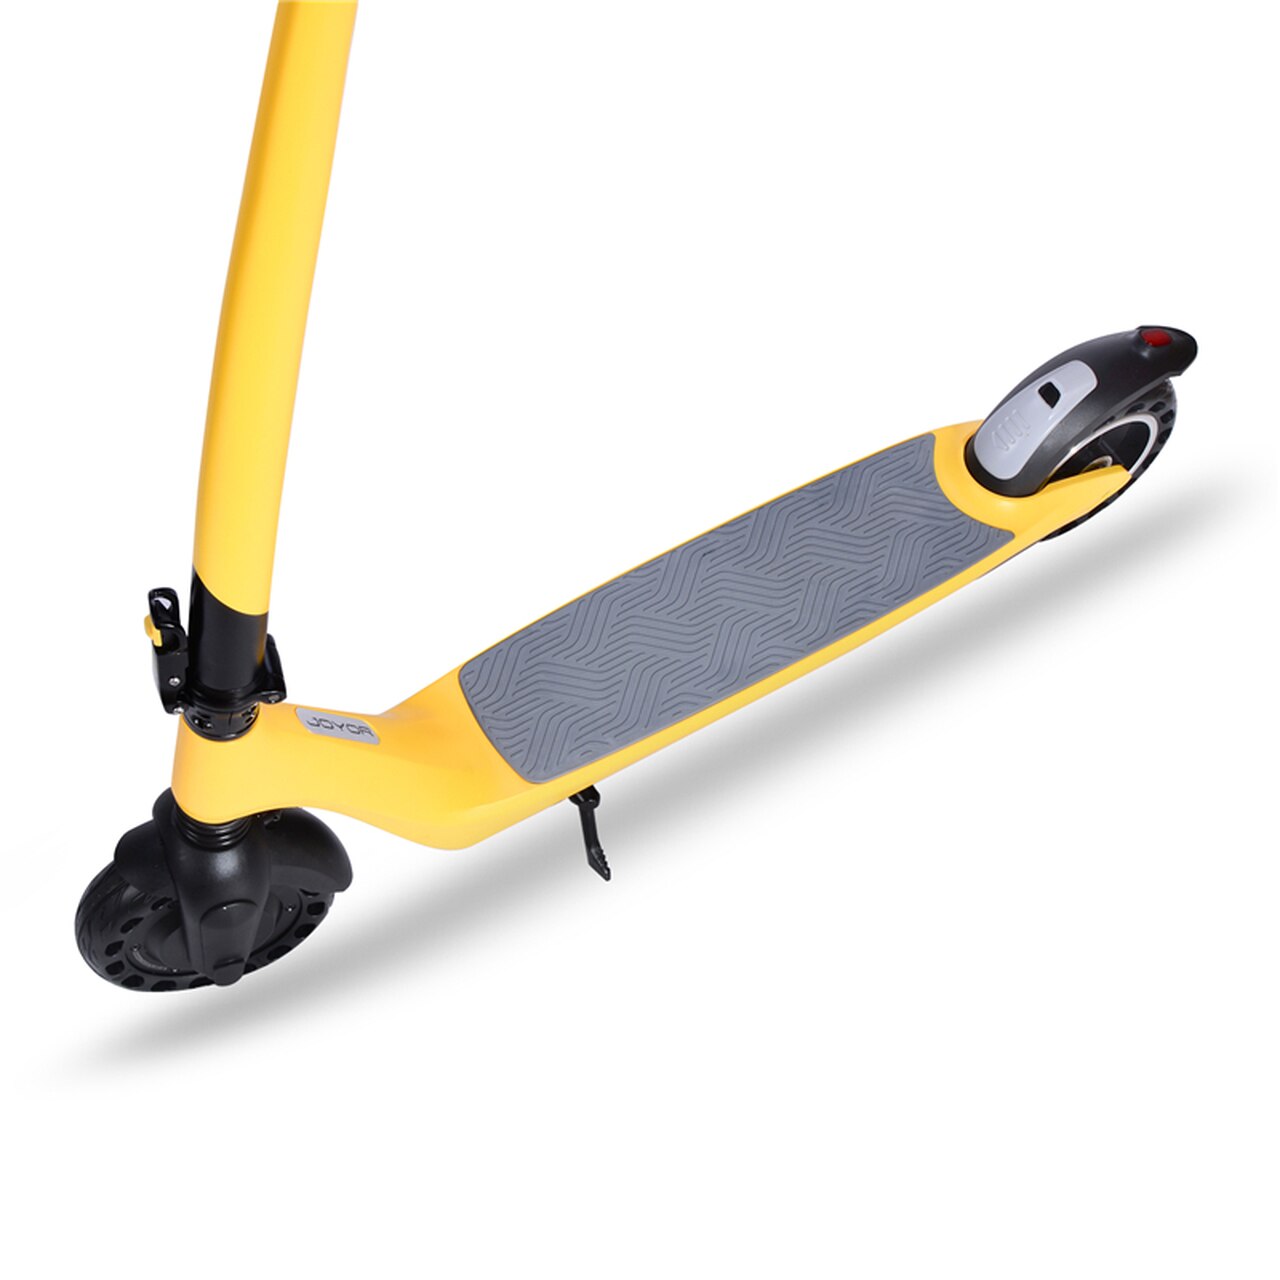 Joyor A3 Up to 21.7 Mile Range 8" Tires Electric Scooter Yellow New